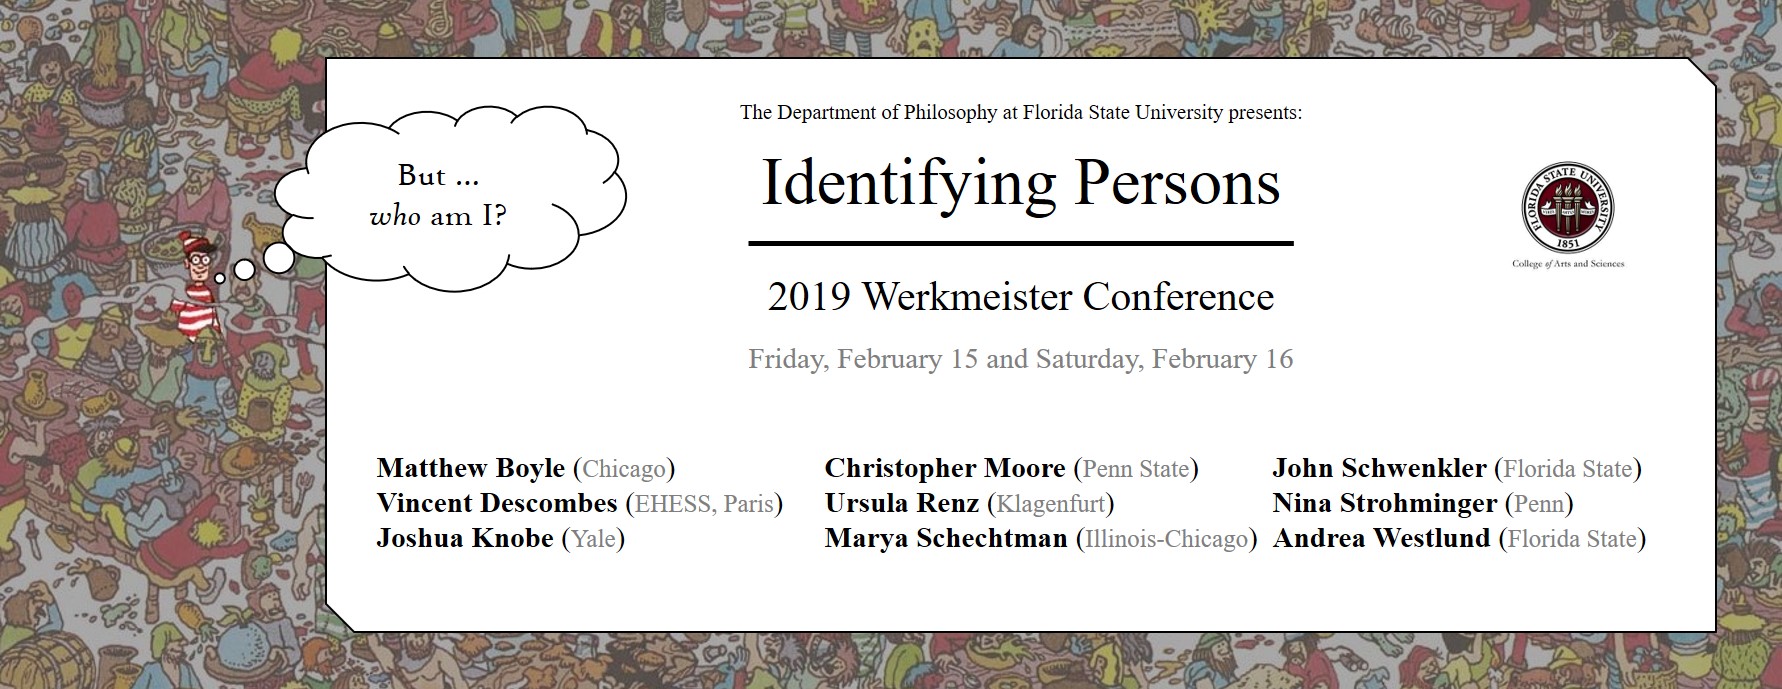 2019 werkmeister conference announcement identifying persons